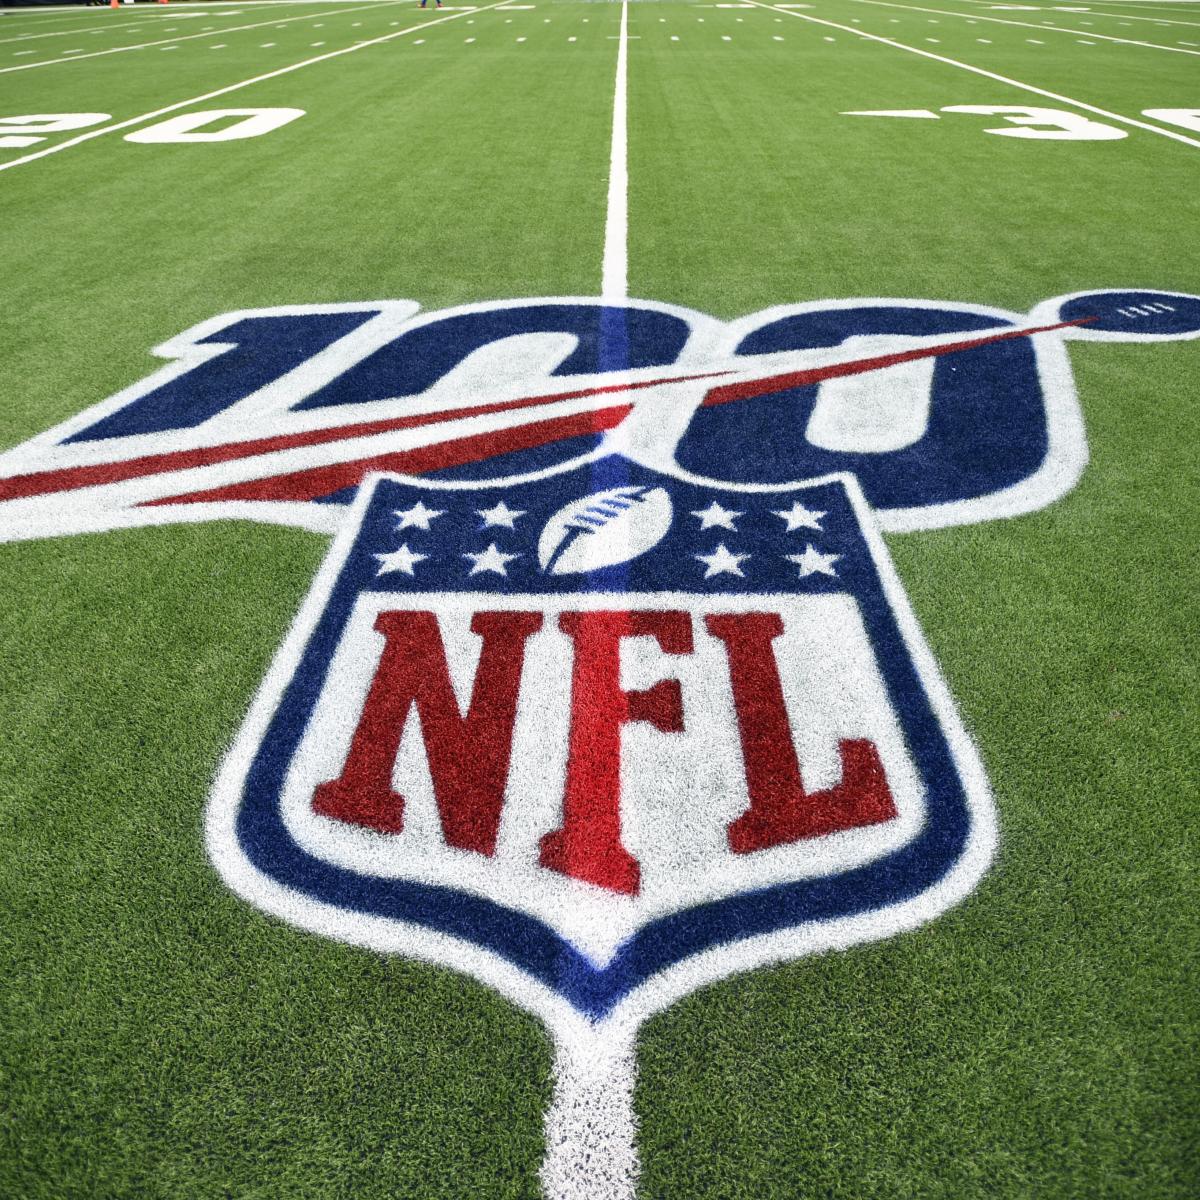 NFL Reportedly Could Move Games to Saturday If CFB Cancels Season Amid